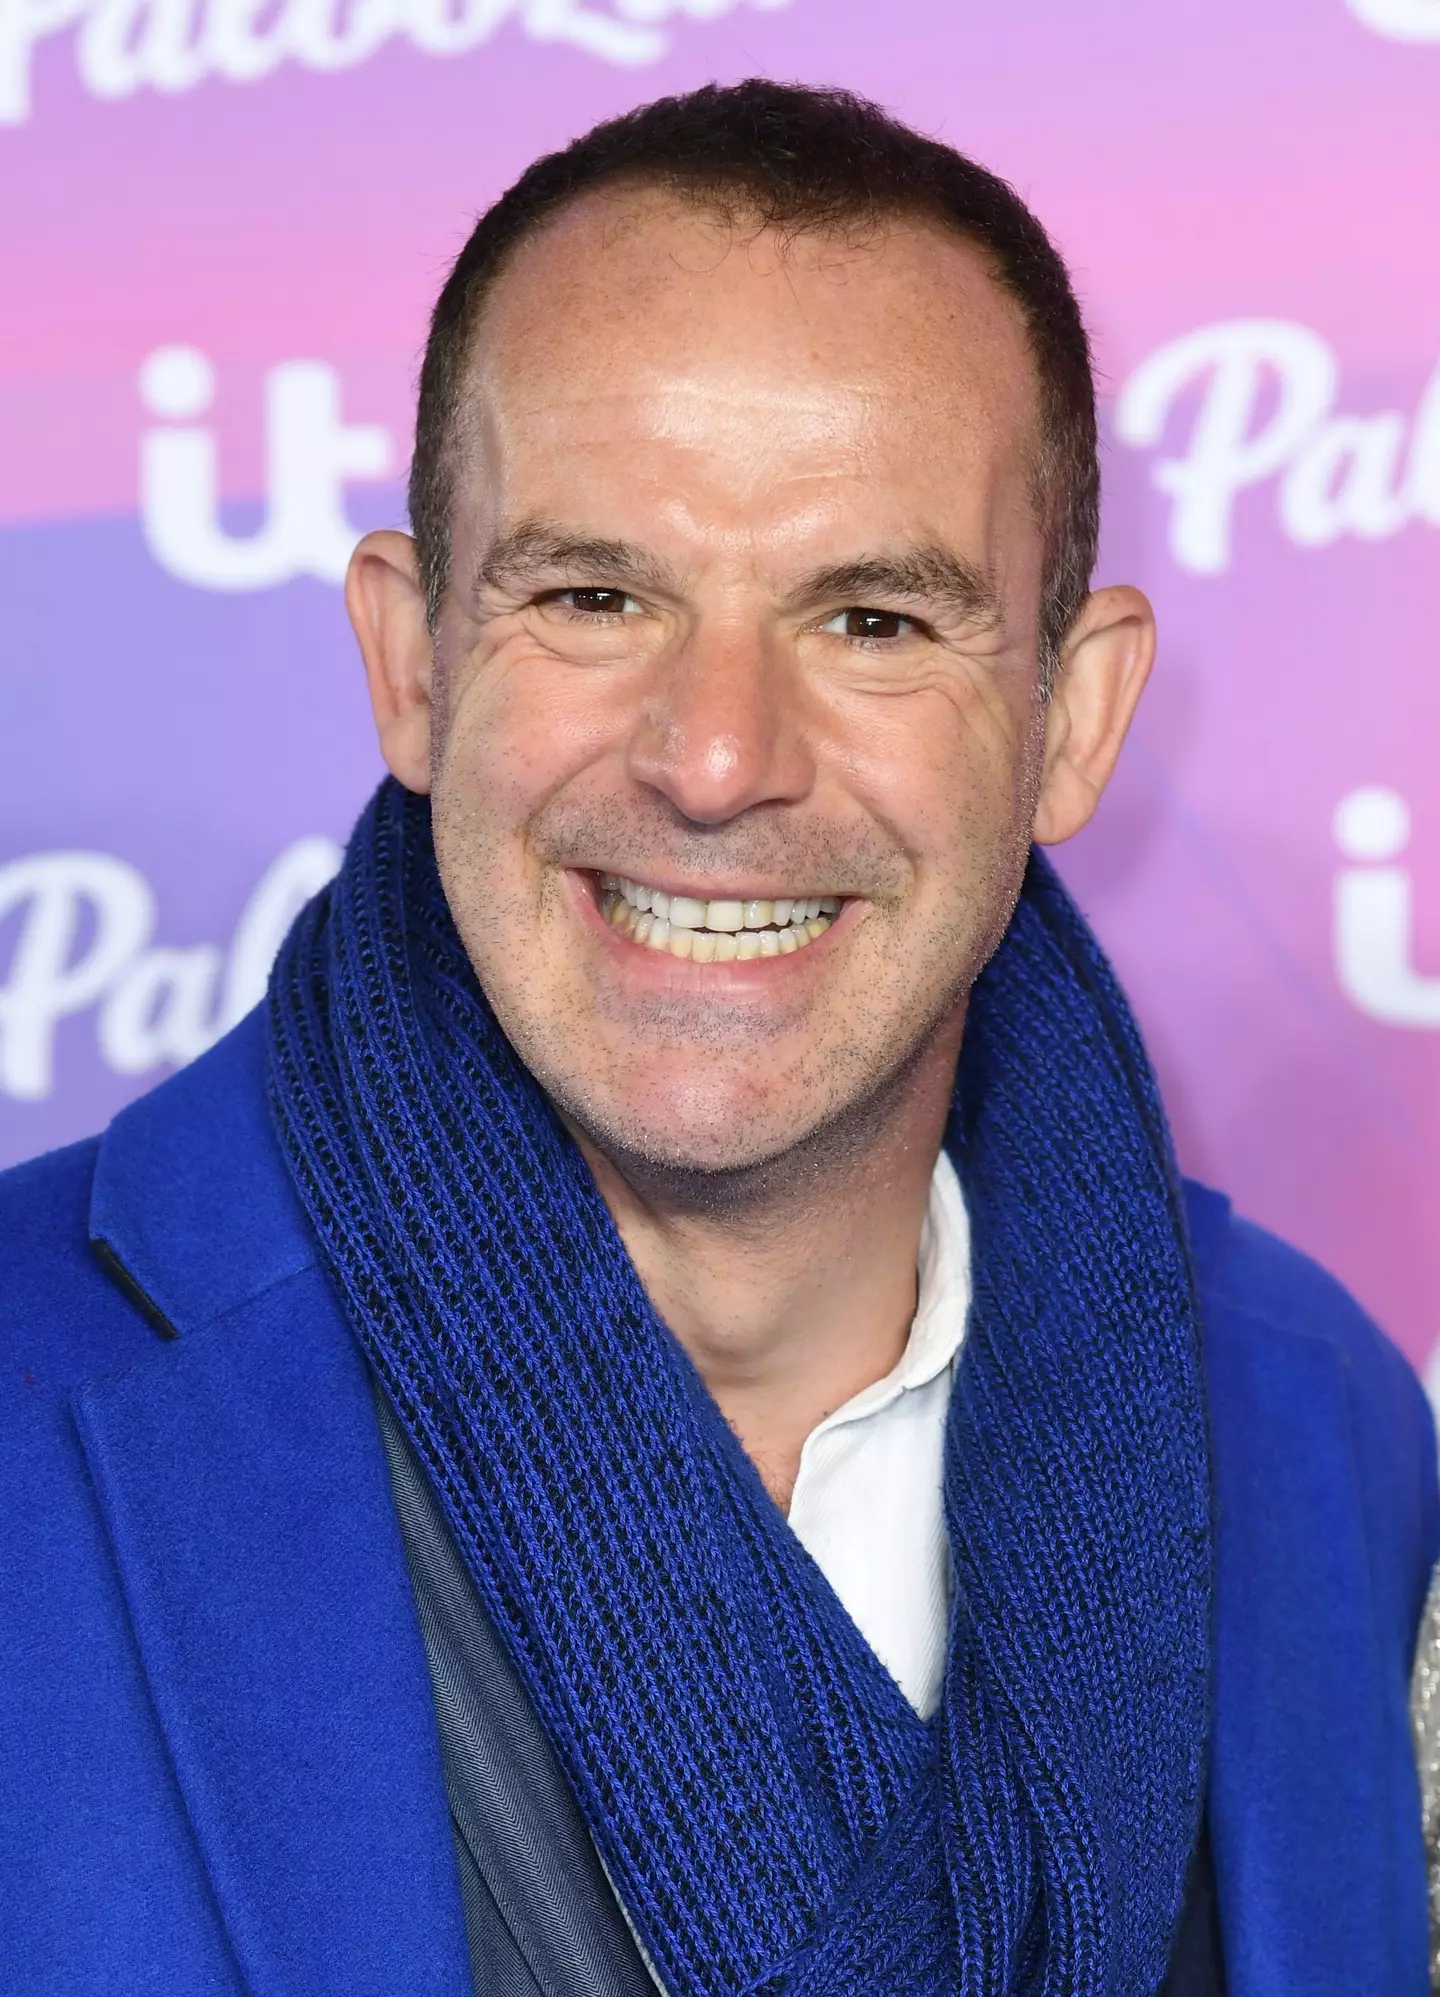 Martin Lewis has issued a two week warning to Tesco shoppers.